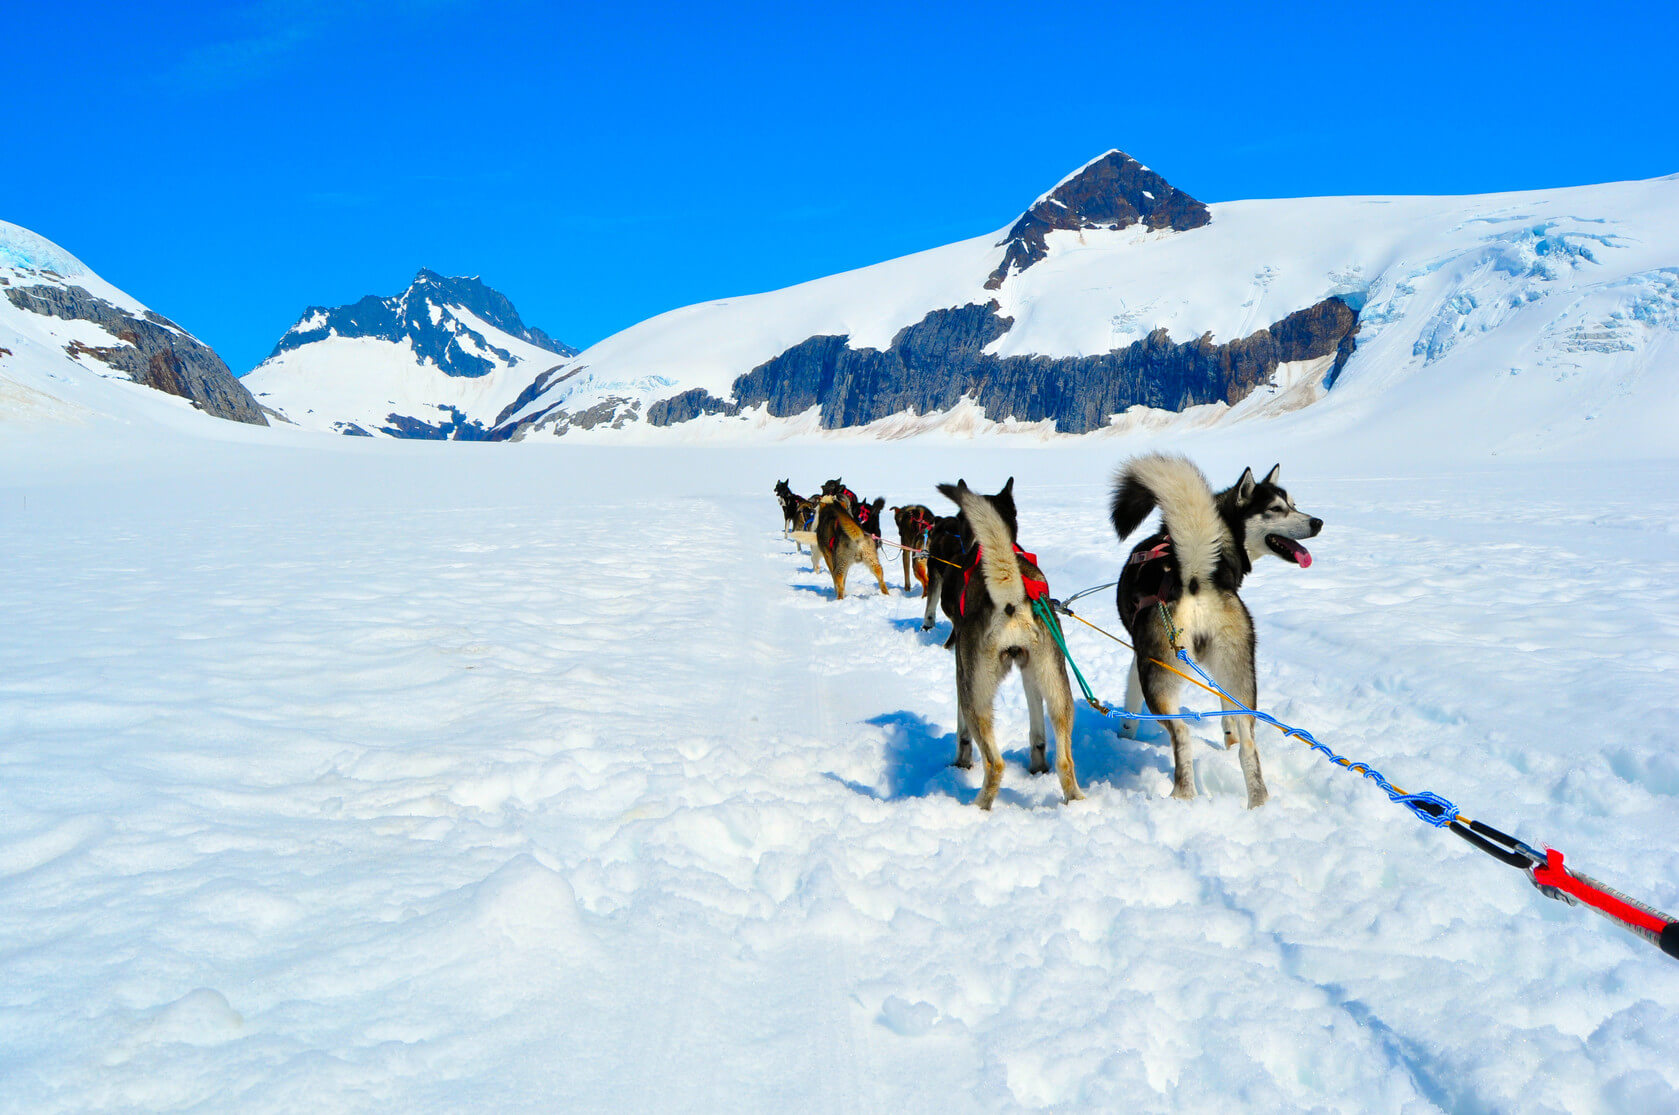 Snow, dog sled, mountain side